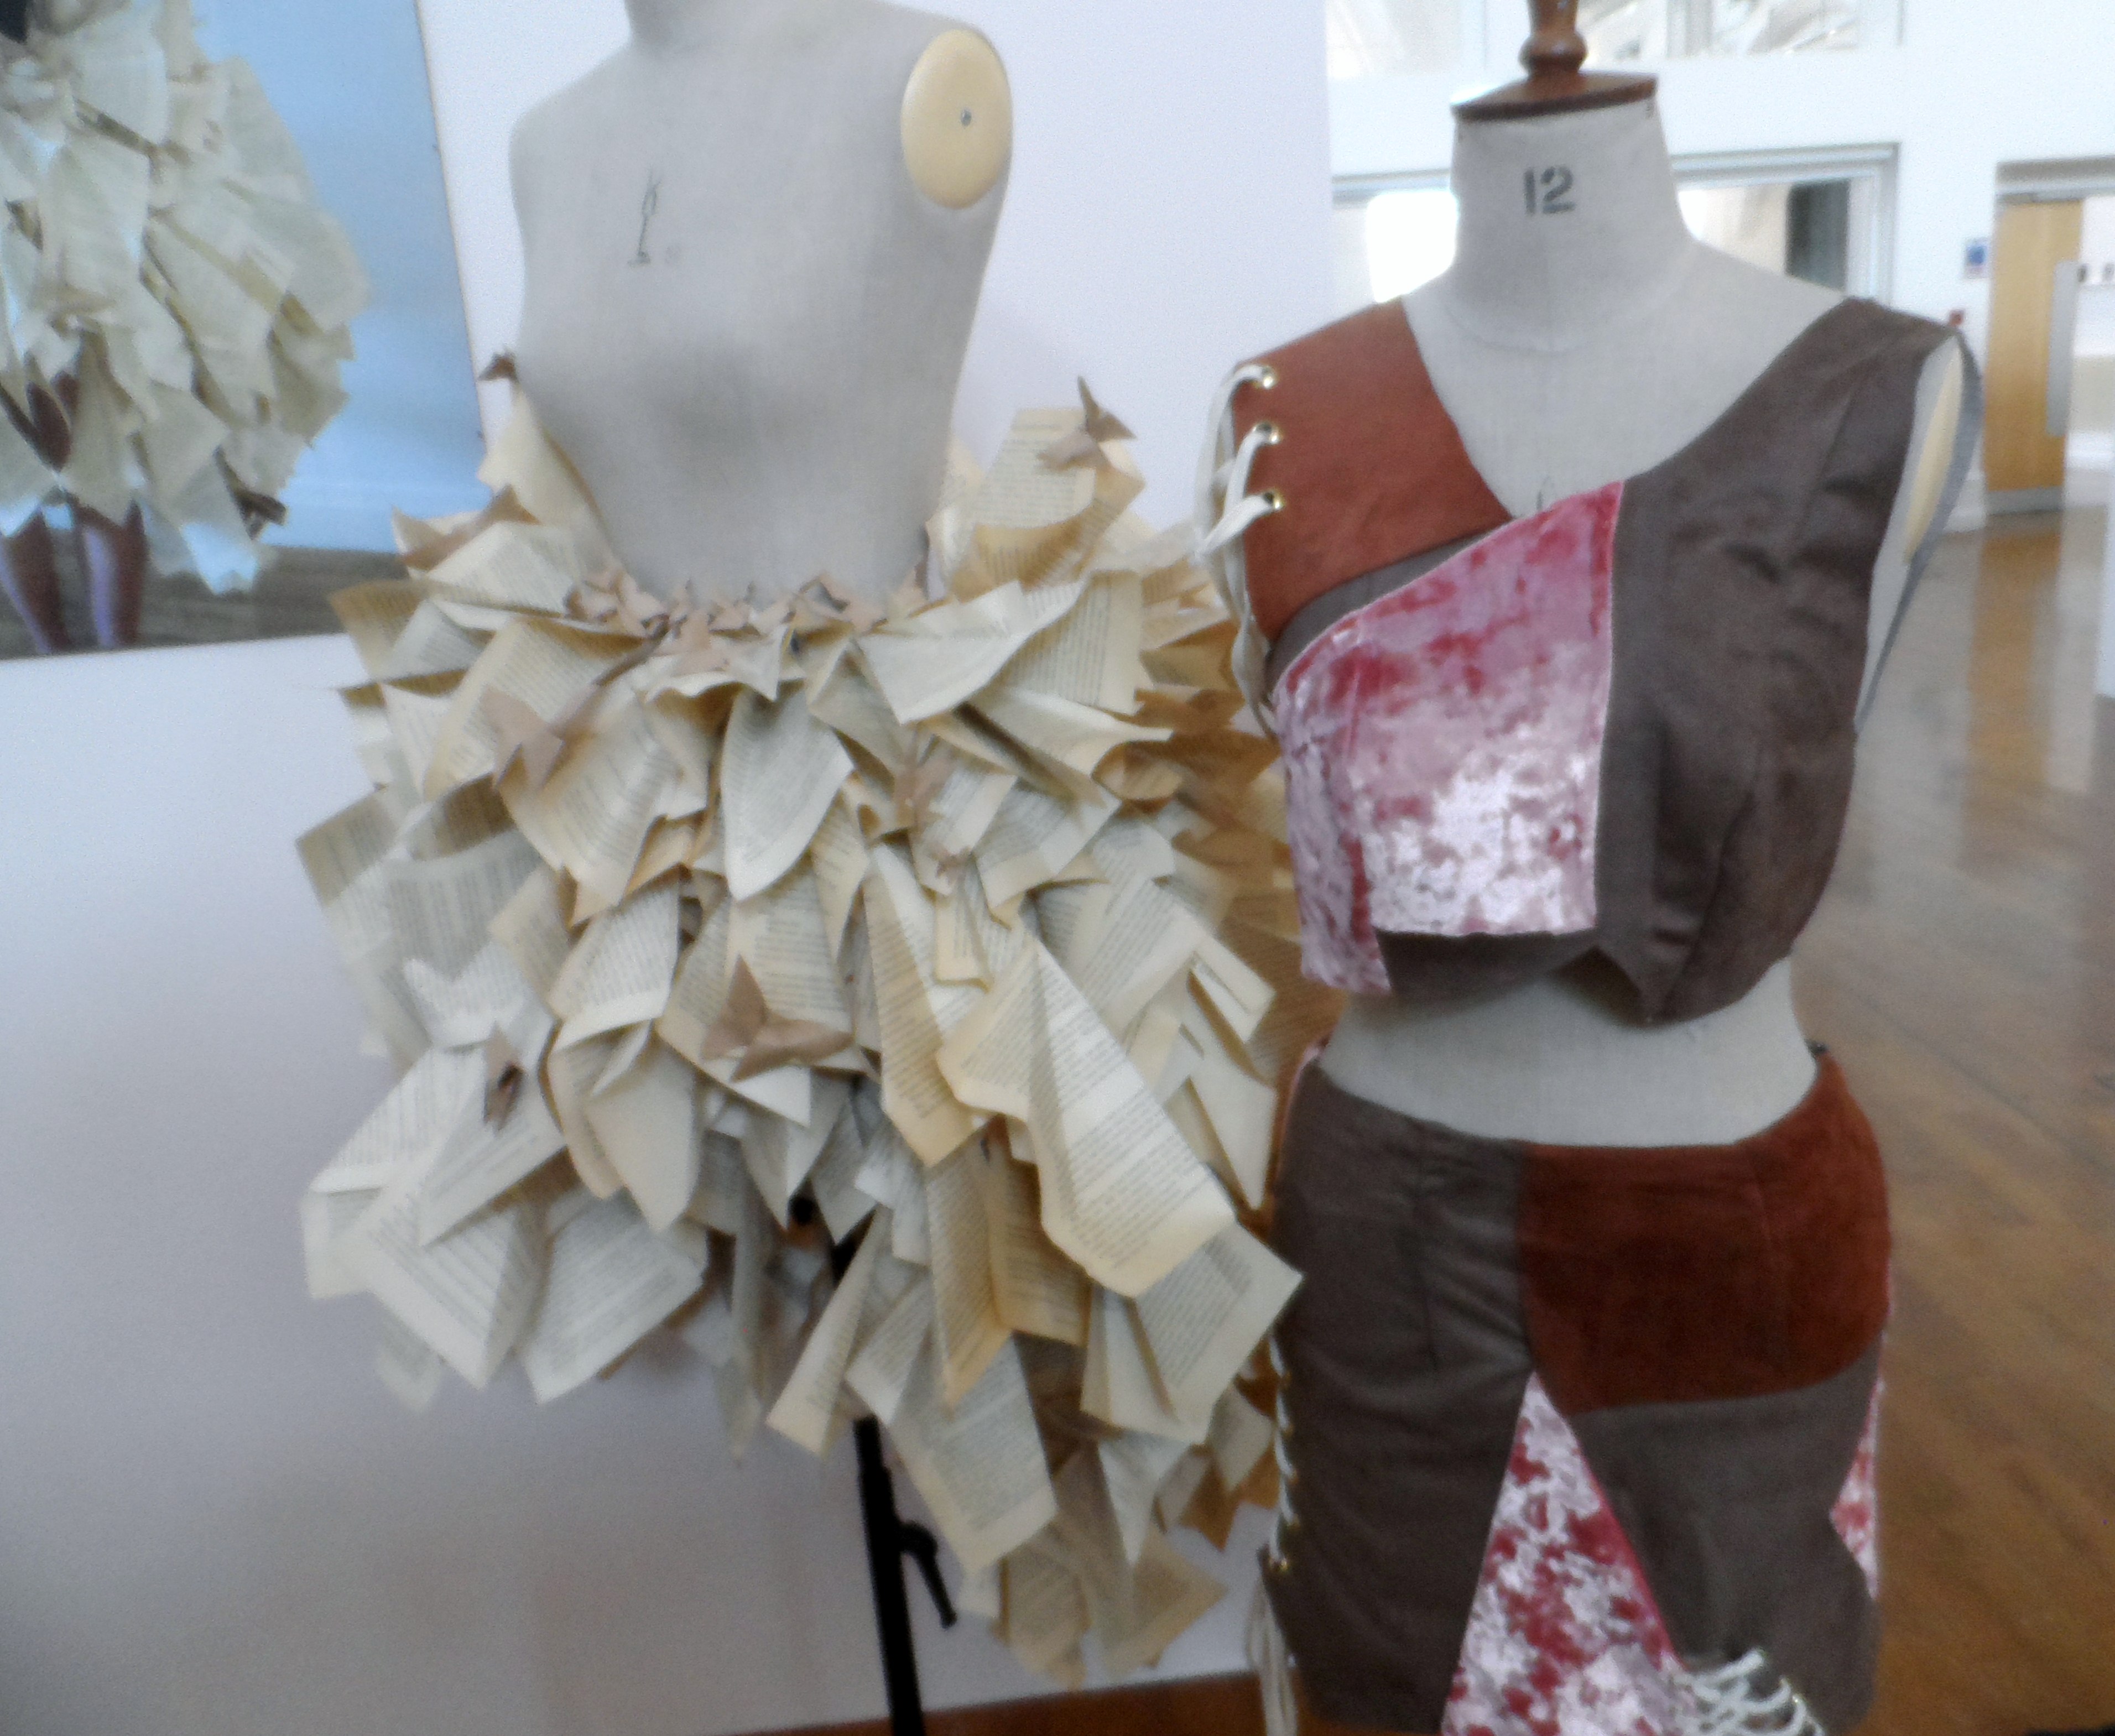 designs by by Thea Whyte, BA Design, Hope Uni Final Degree Show 2018